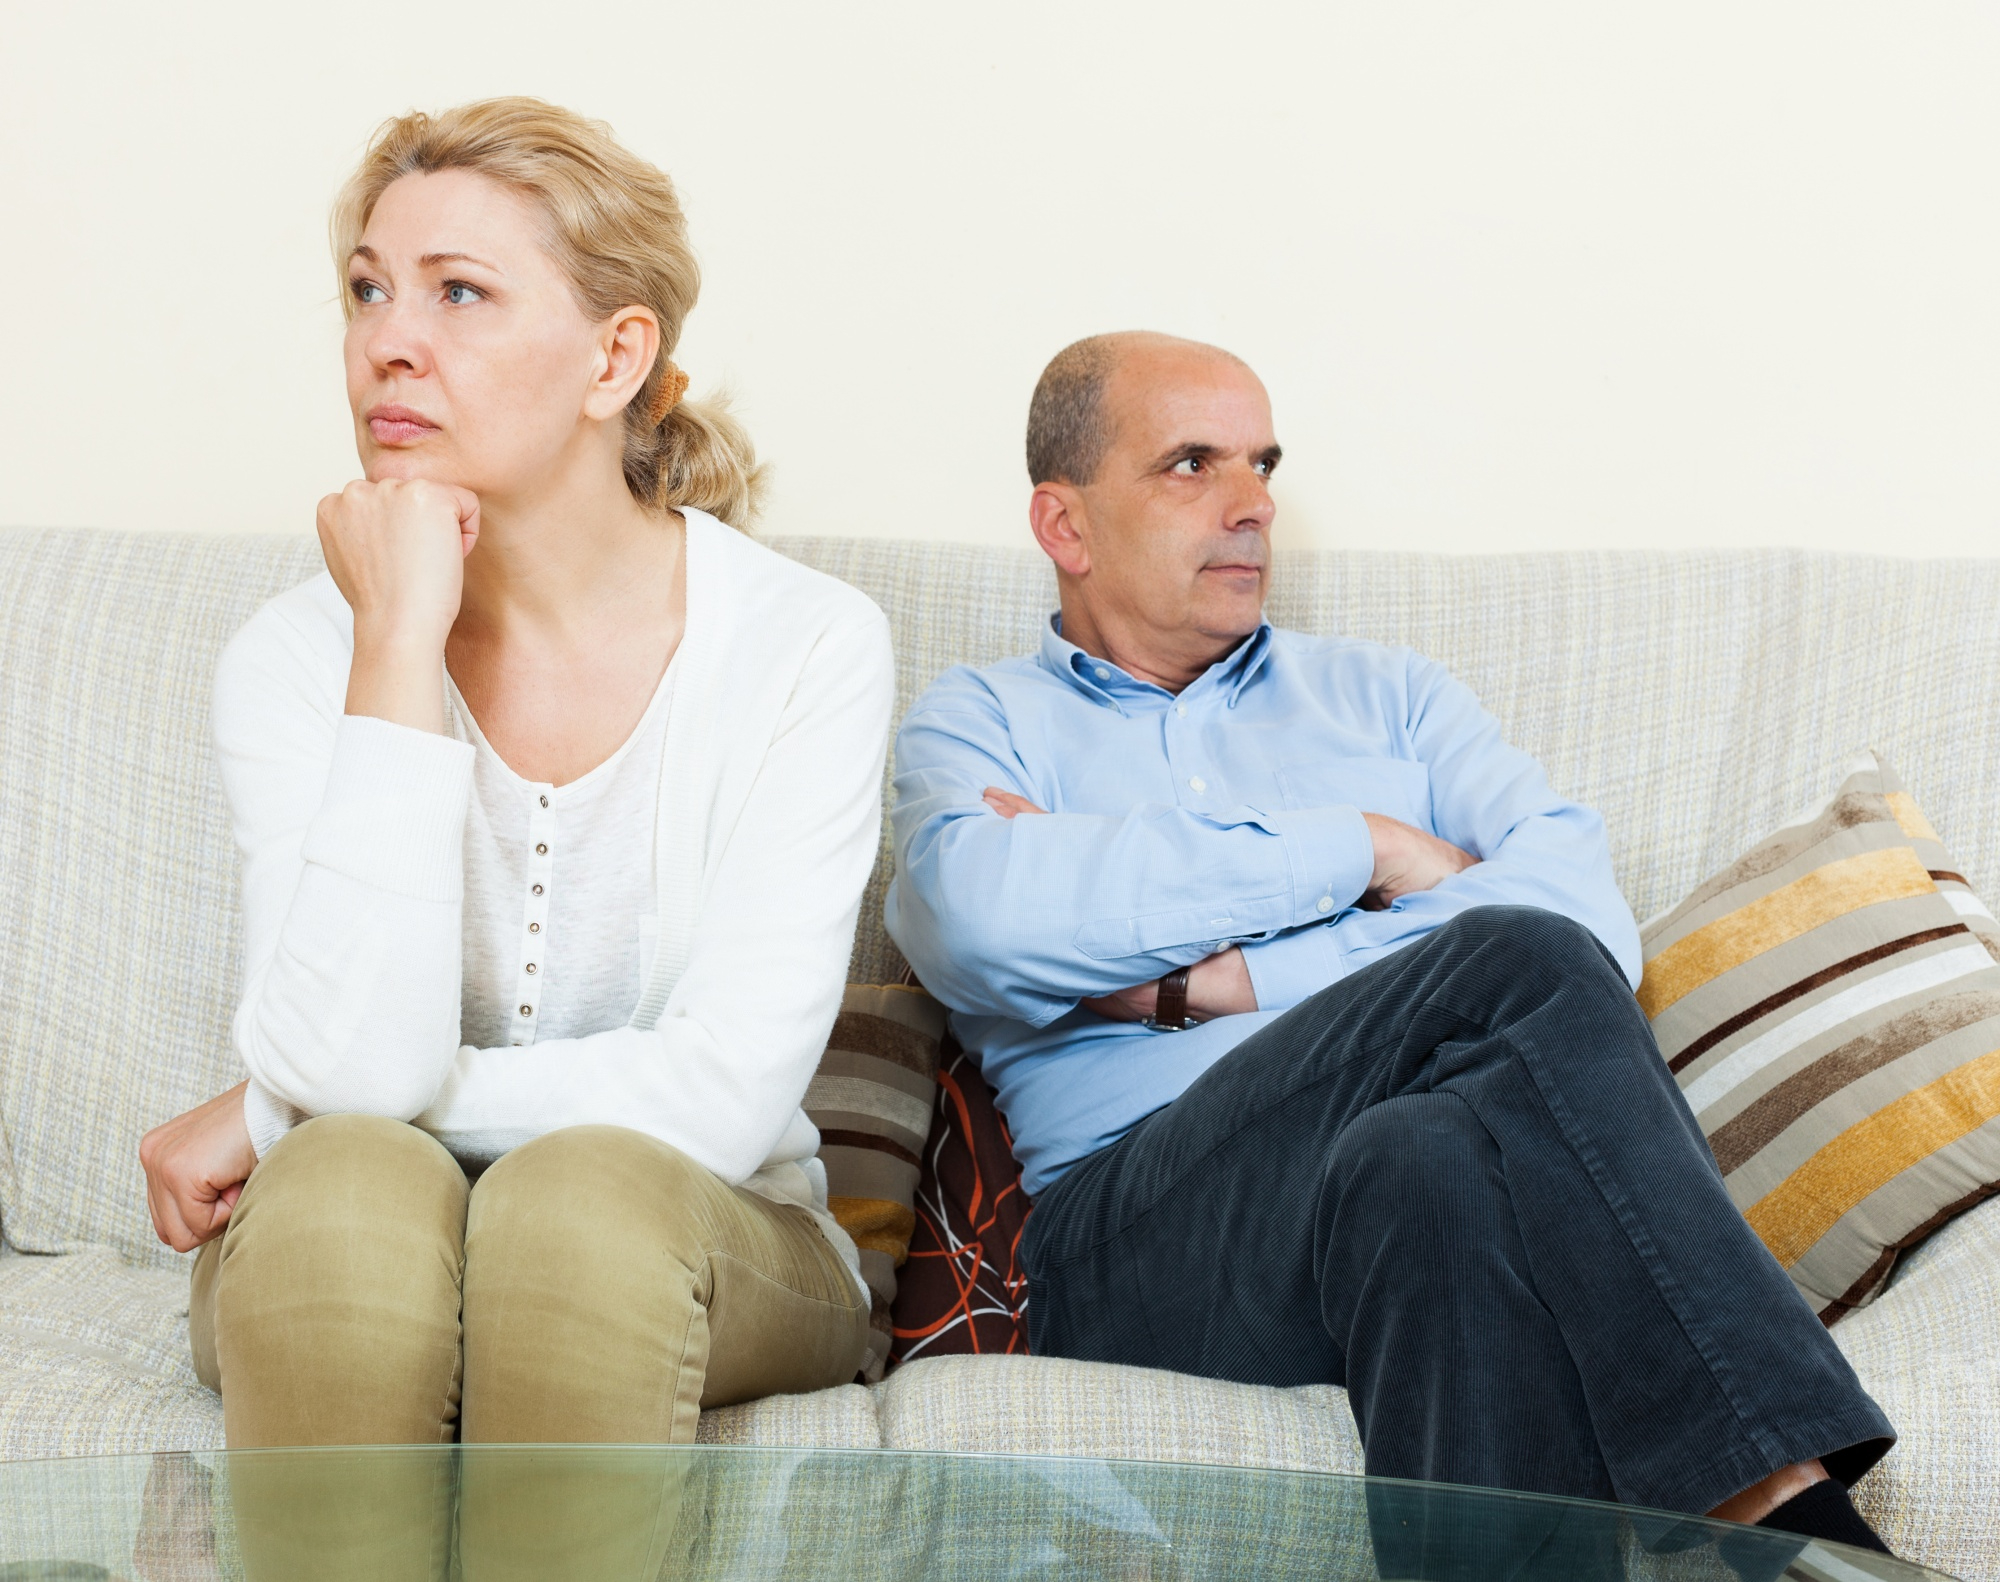 A middle-aged couple not speaking while seated on a couch | Source: Freepik